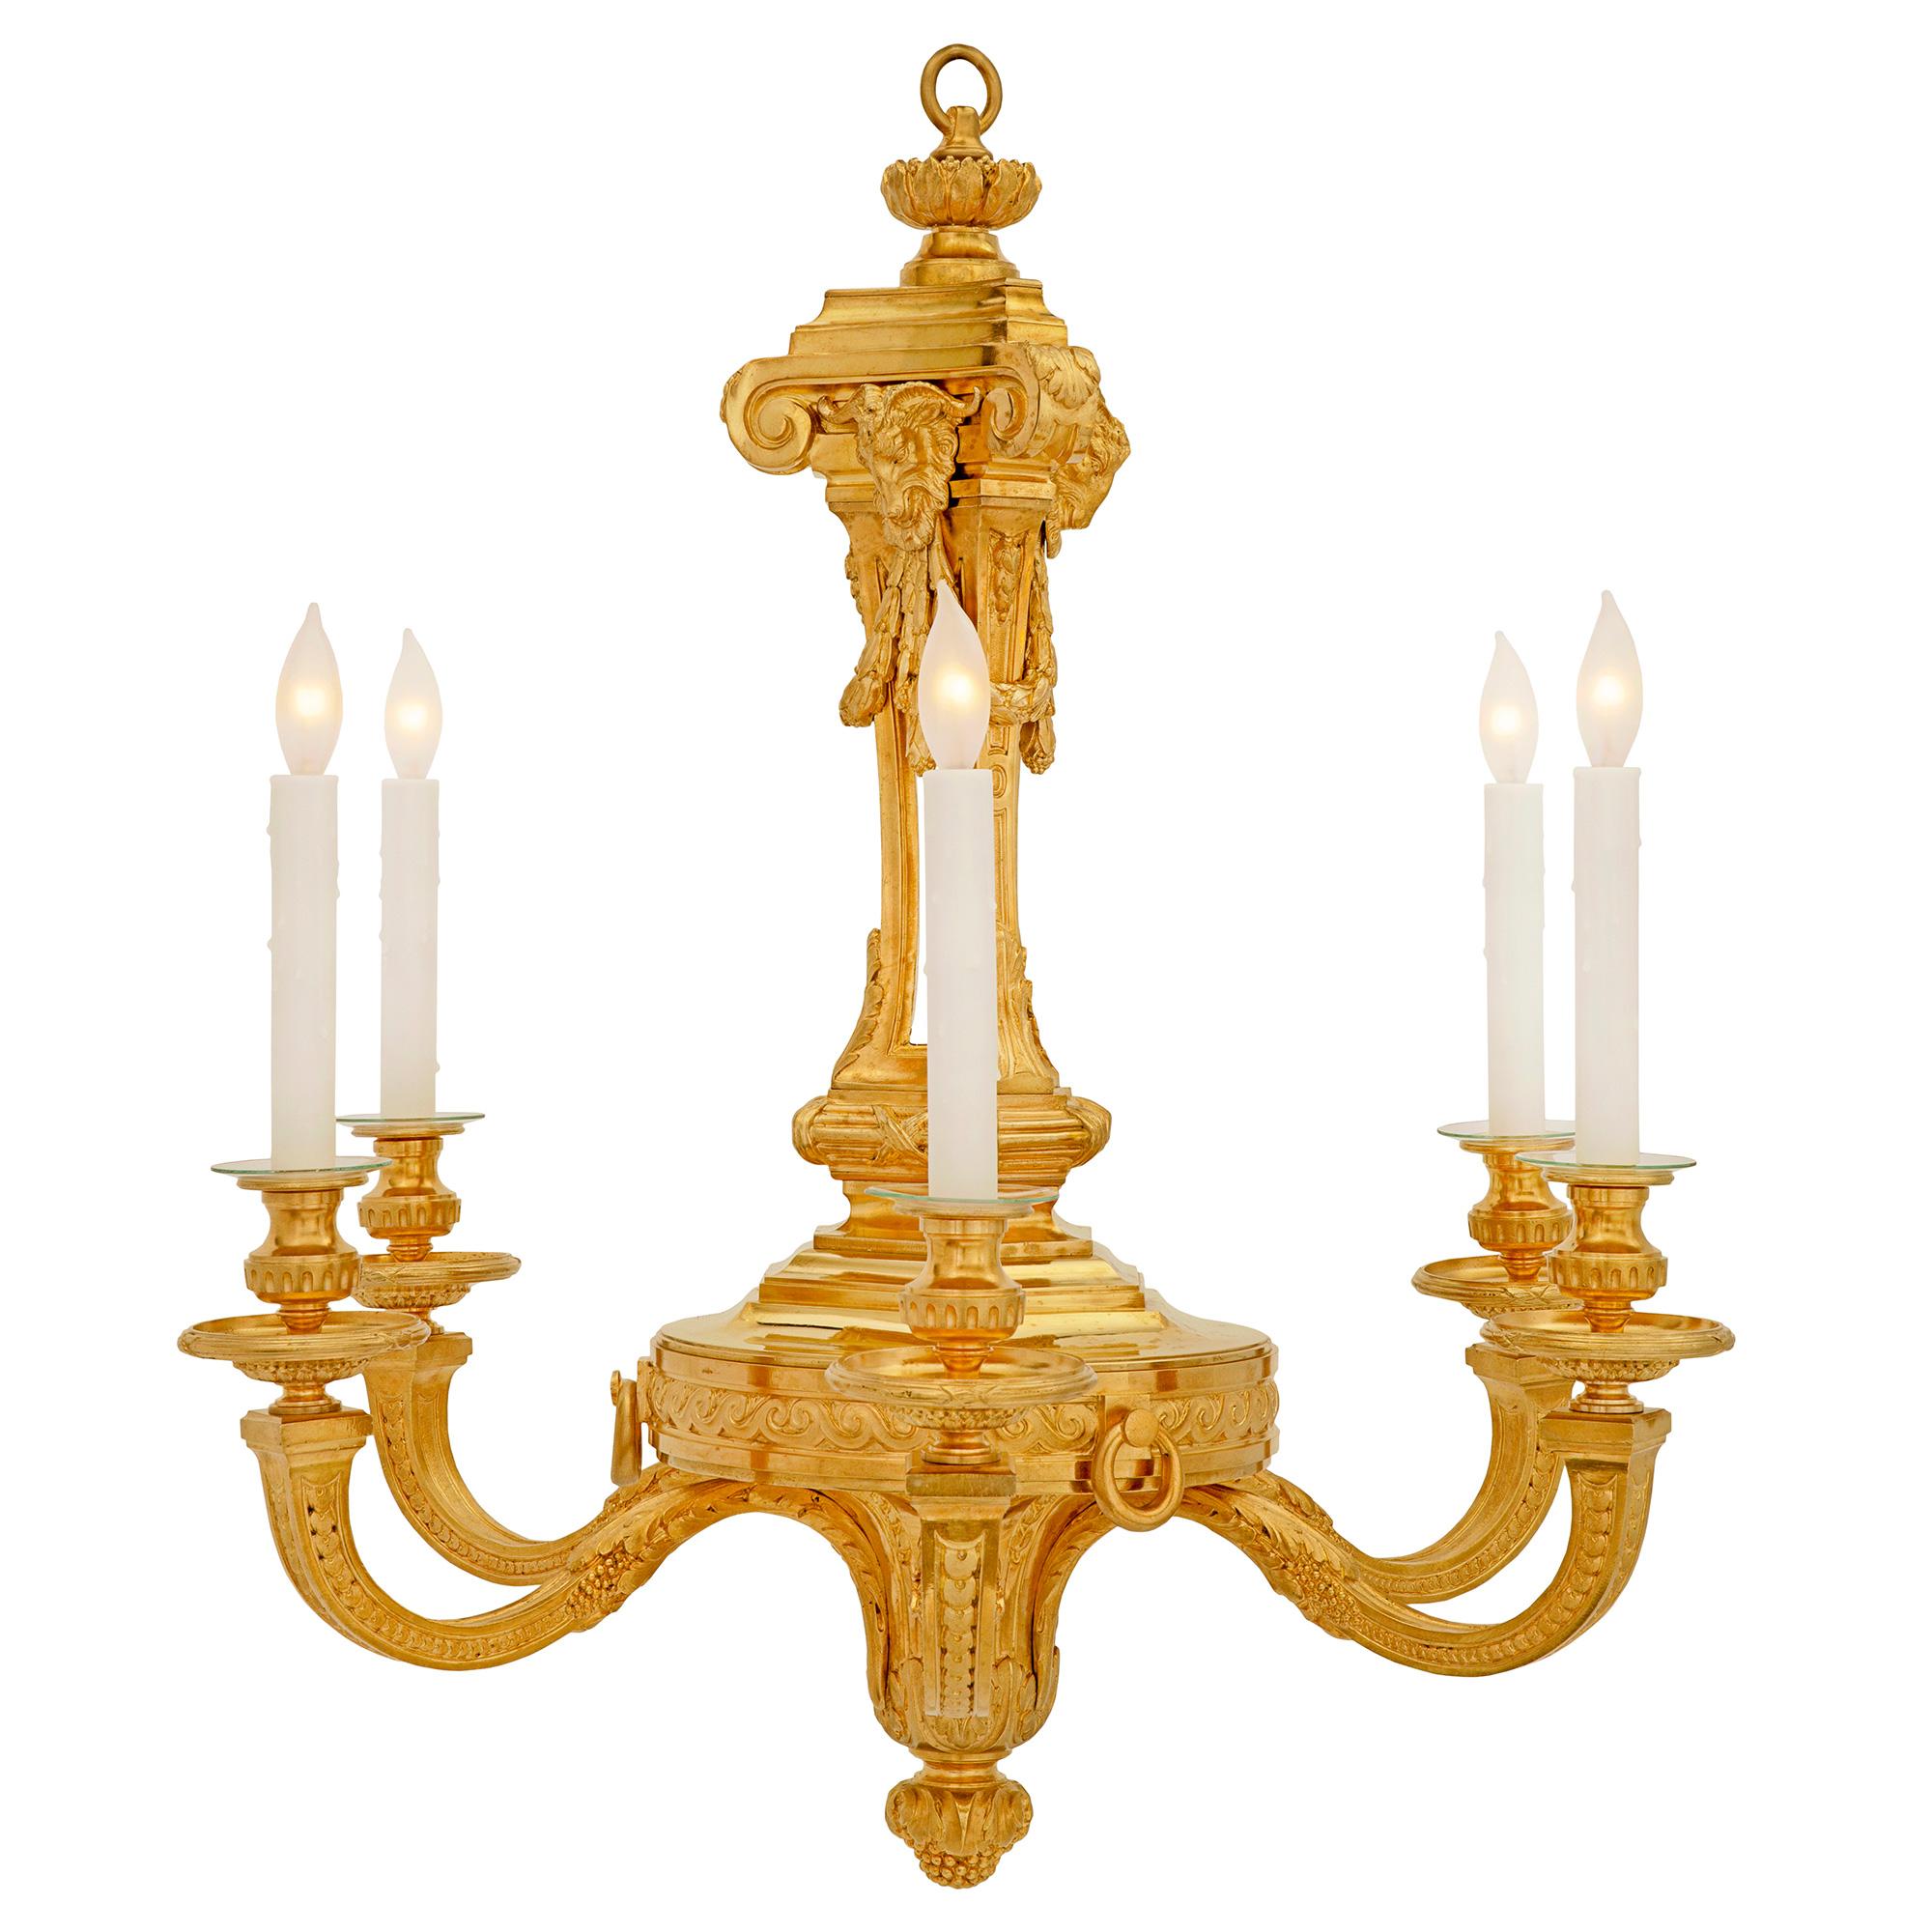 A most handsome French 19th century Louis XVI st. ormolu chandelier. The six arm chandelier is centered by a striking acorn finial with large scrolled acanthus leaves. Each elegant 'S' scrolled arm displays a most decorative overlapping geometric